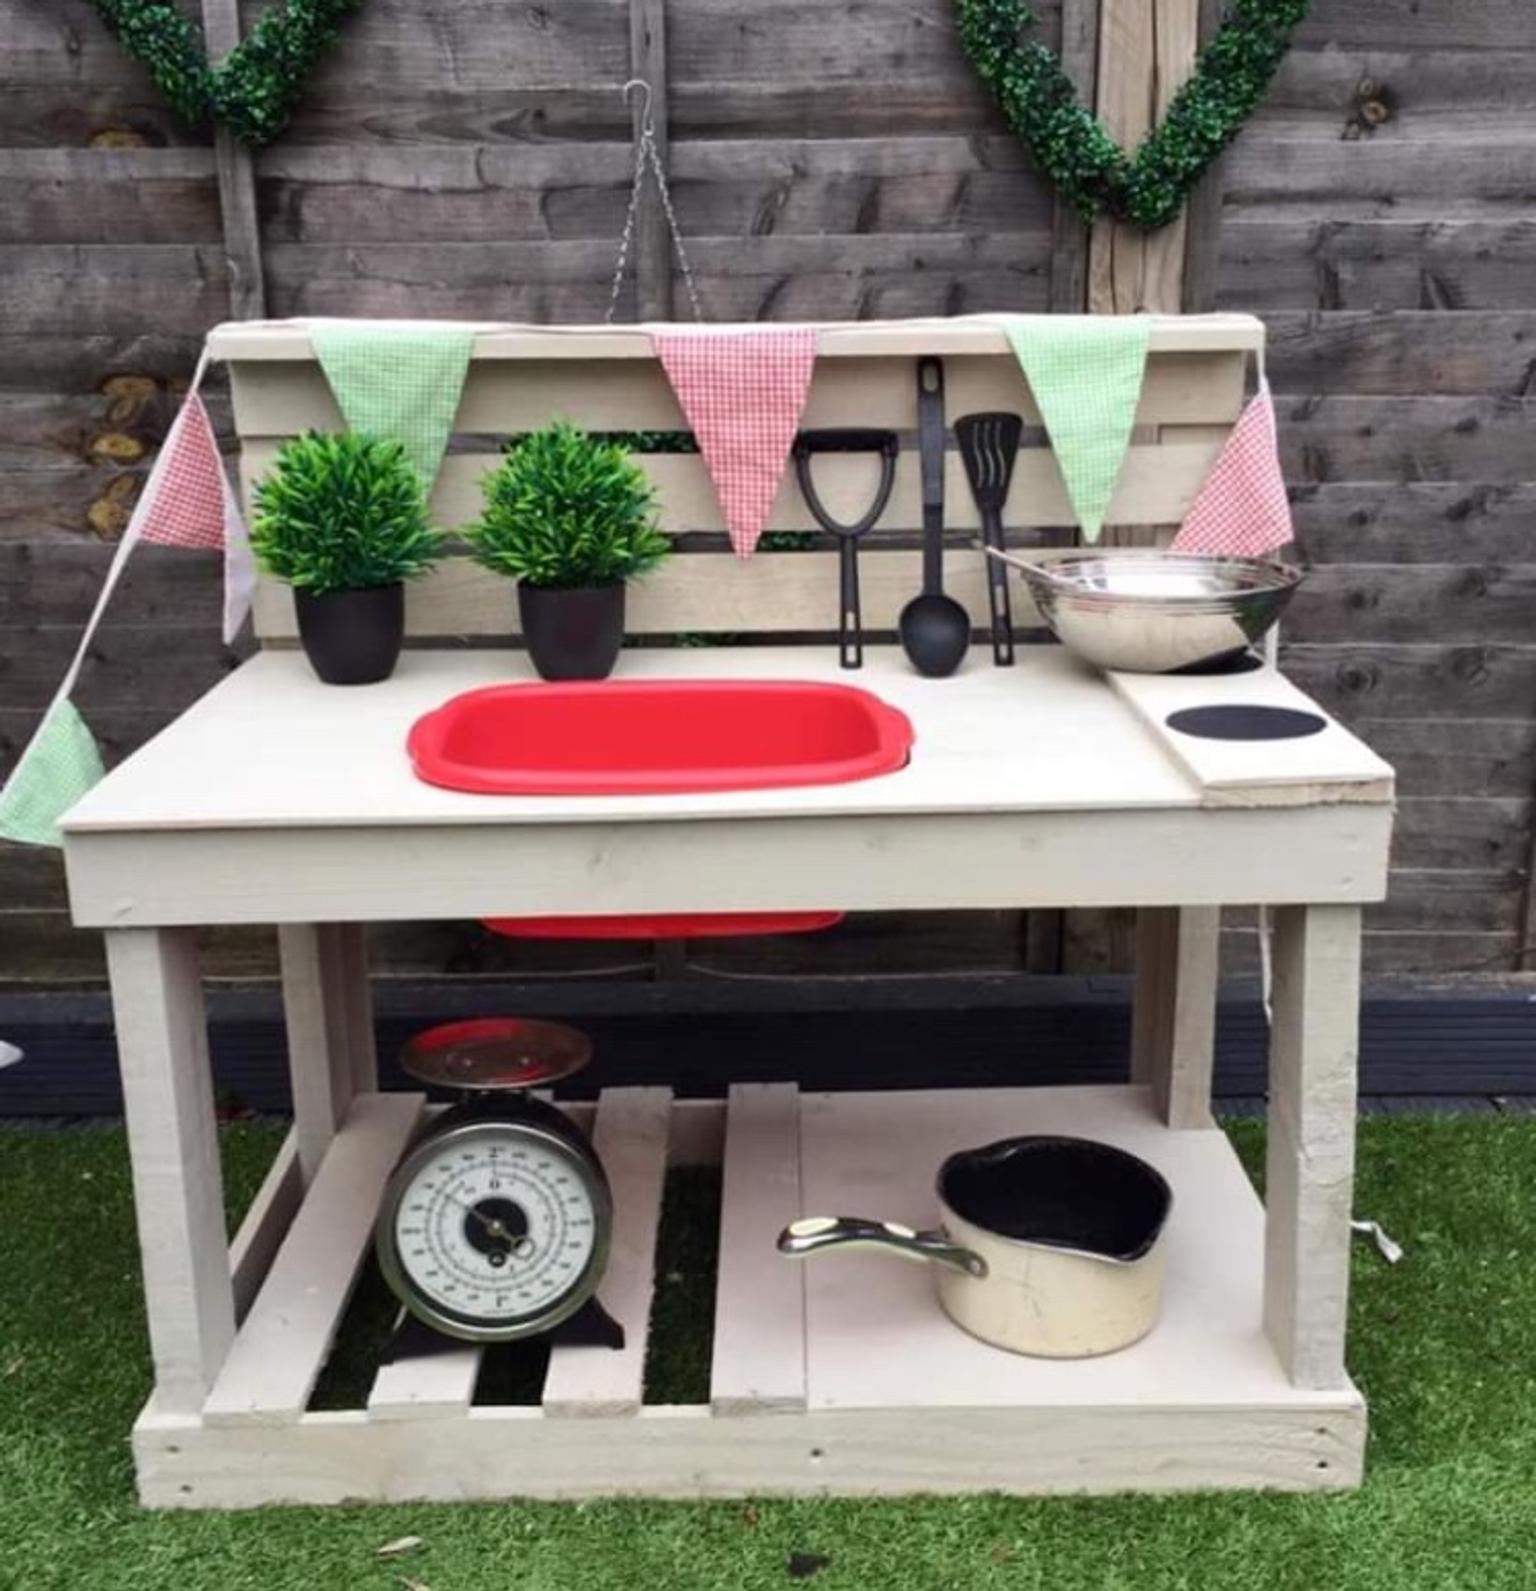 Kids mud kitchen in LE1 Leicester for £40.00 for sale | Shpock